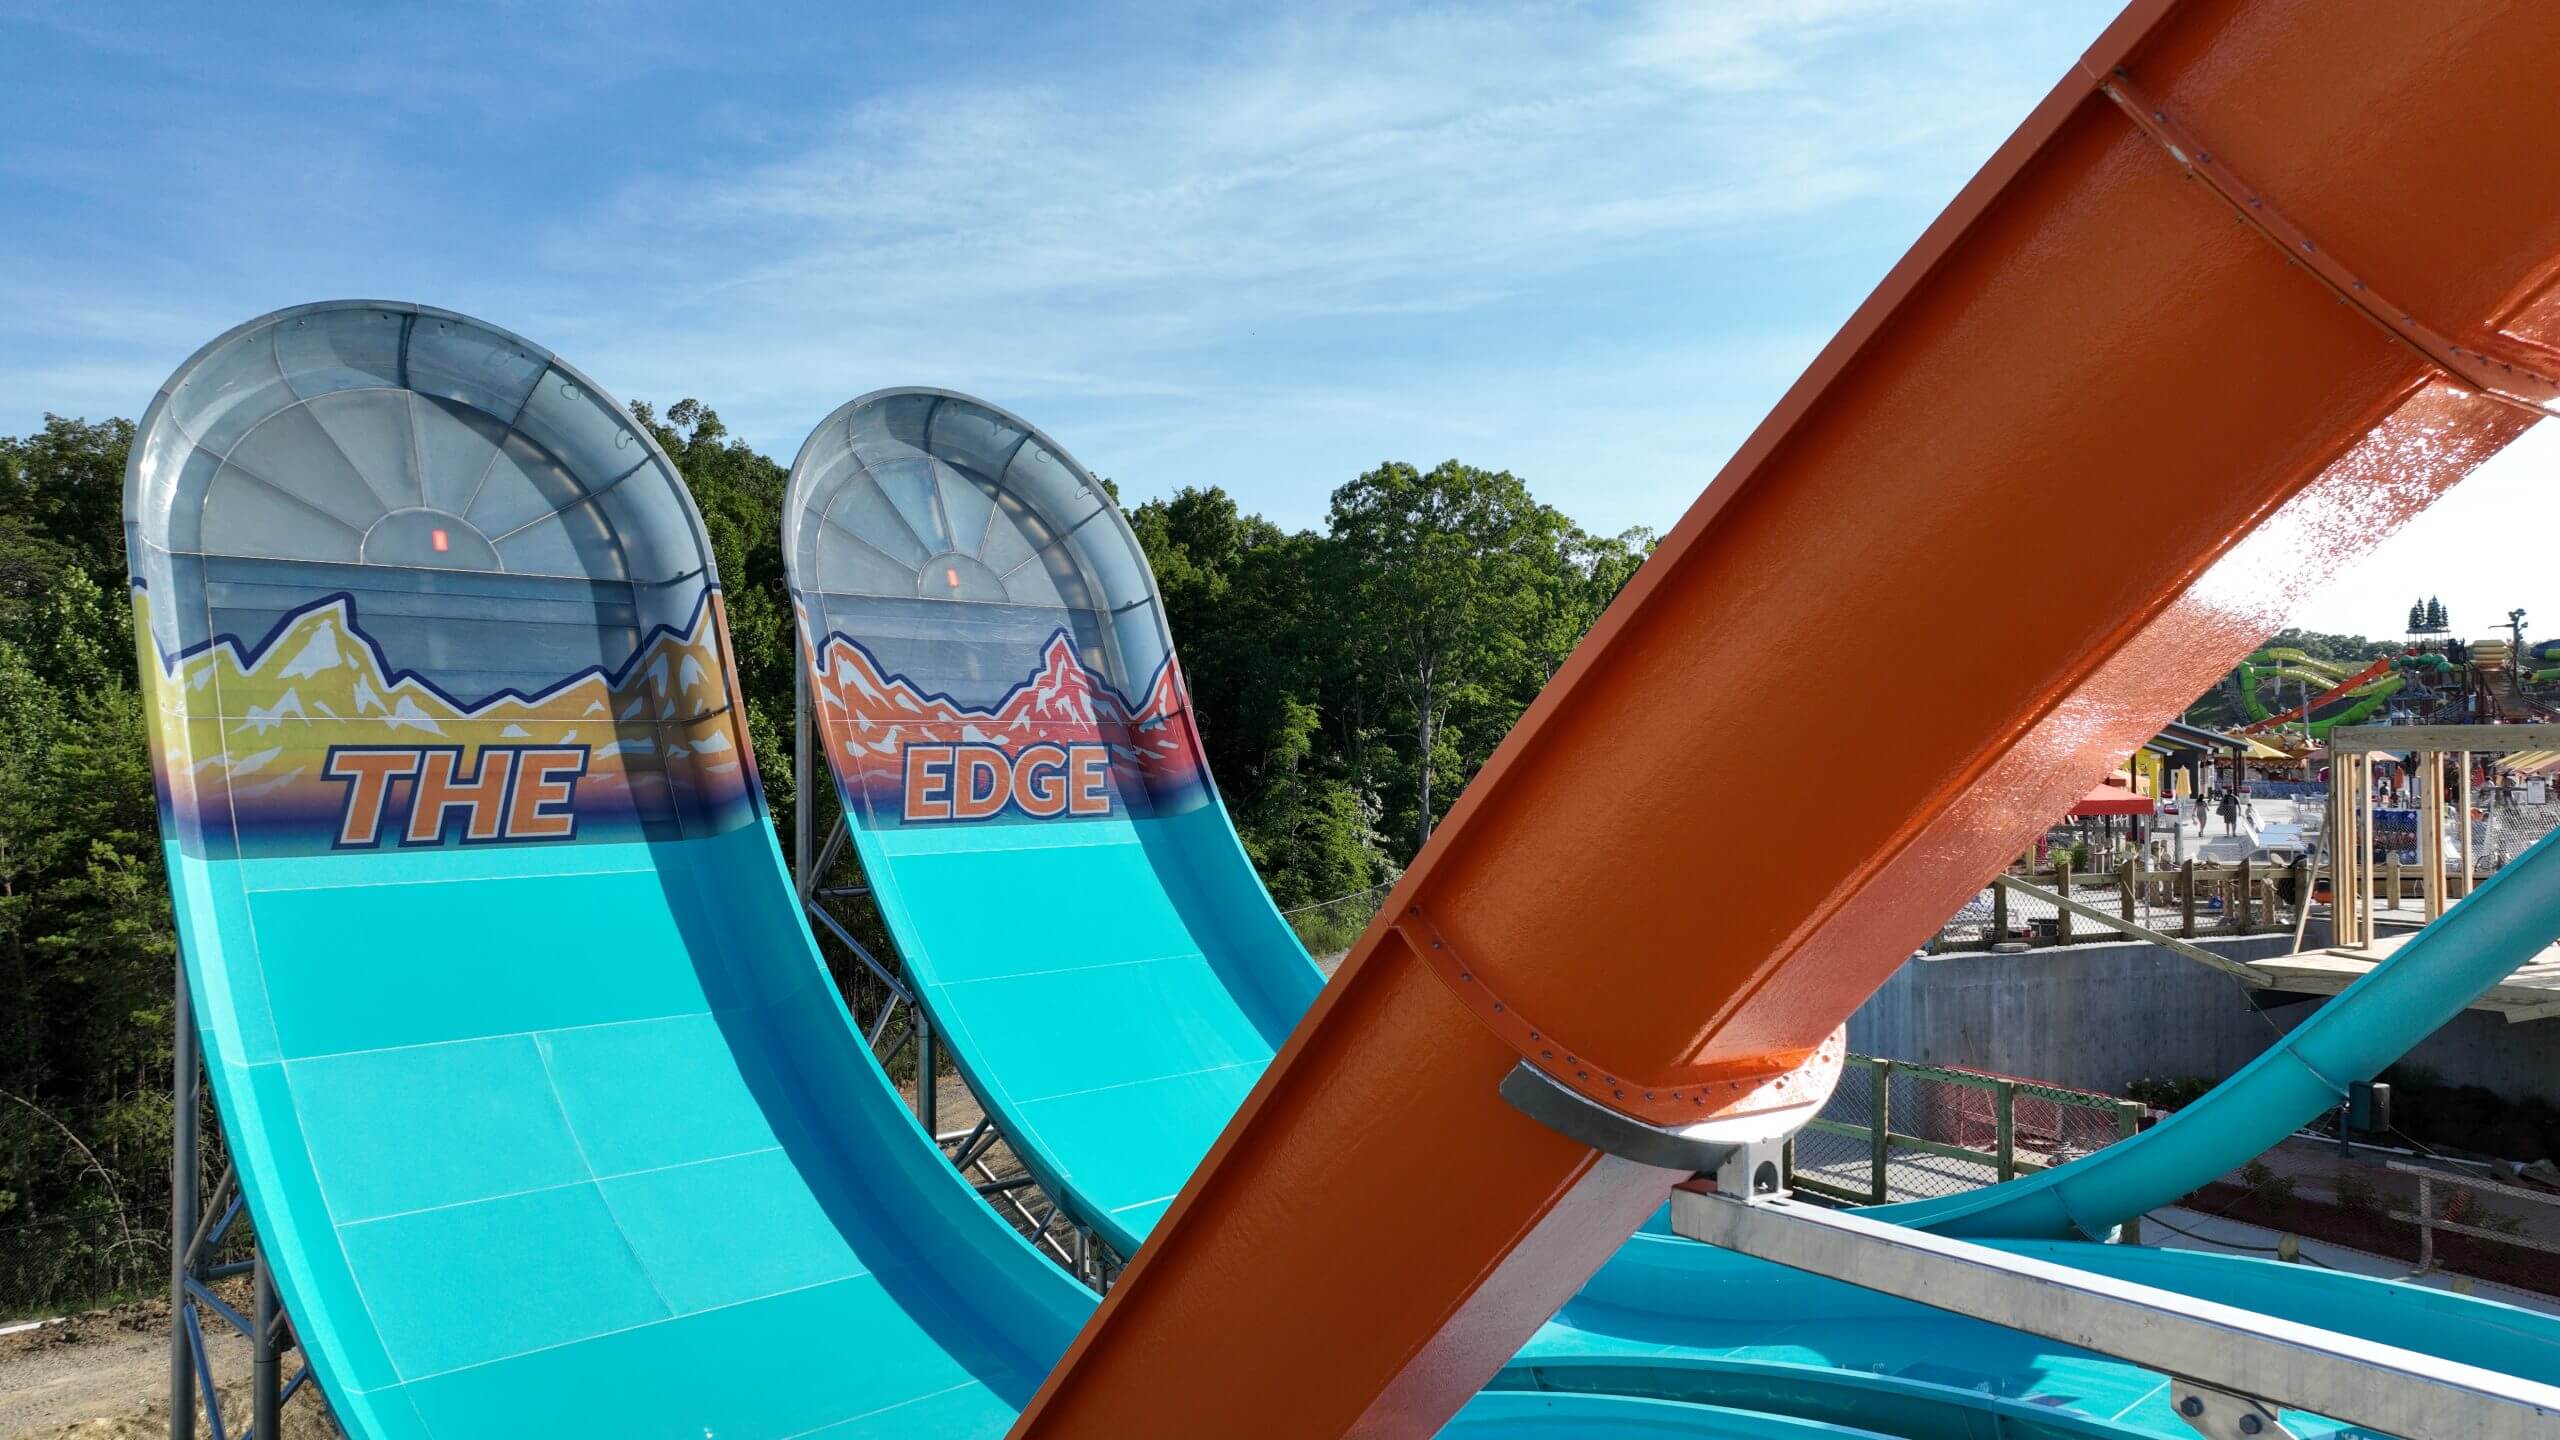 The Edge Dueling Watercoaster